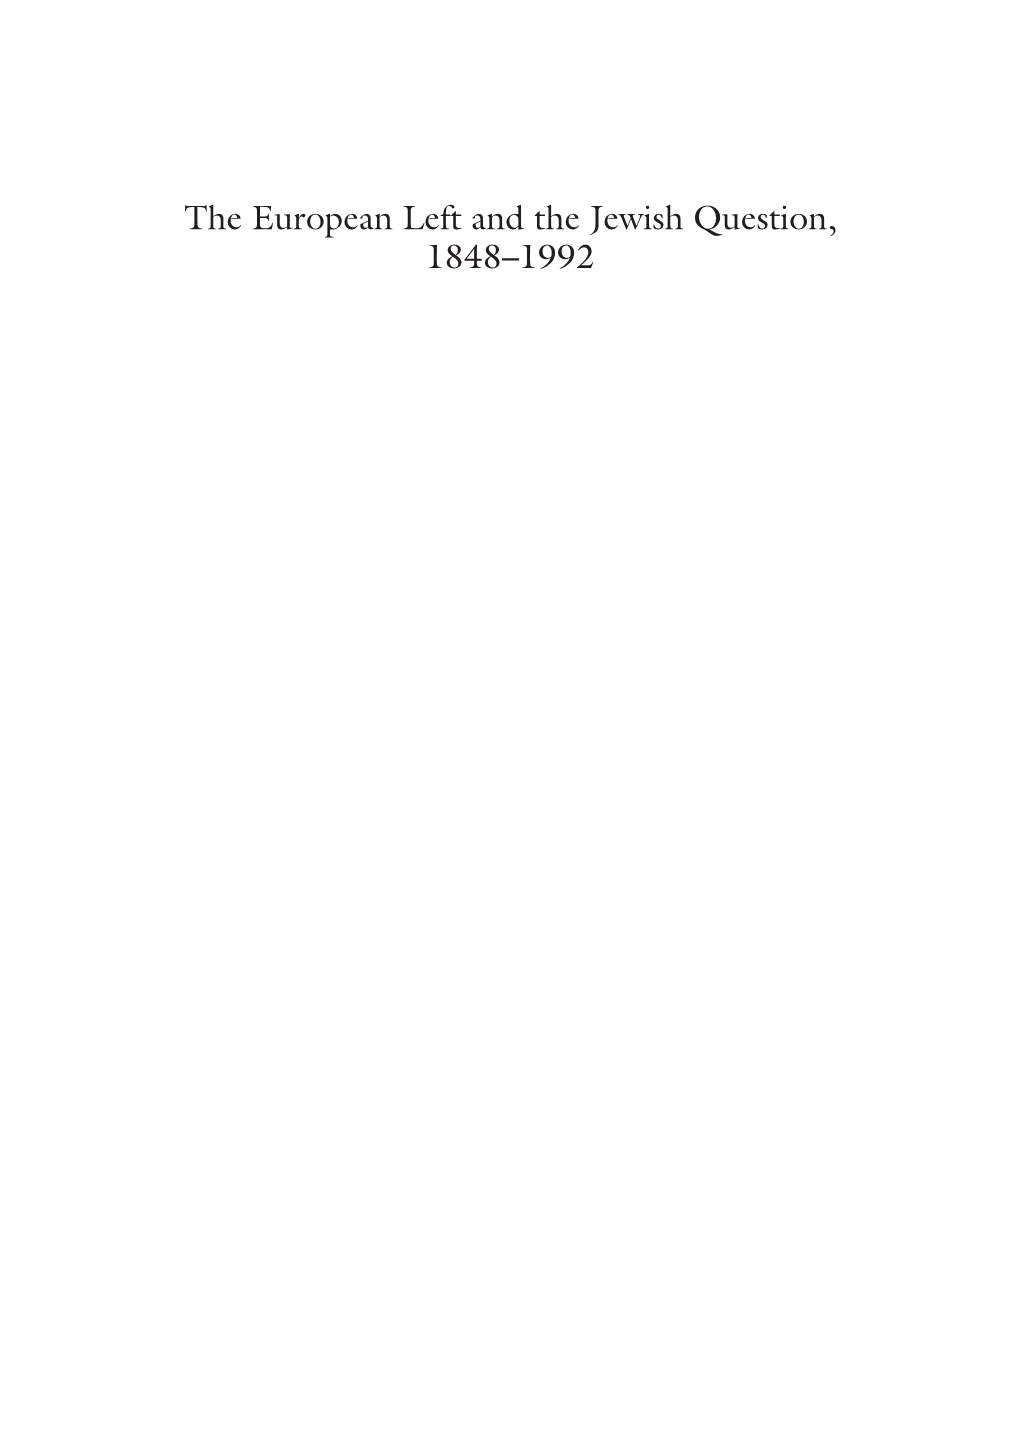 The European Left and the Jewish Question, 1848–1992 Alessandra Tarquini Editor the European Left and the Jewish Question, 1848–1992